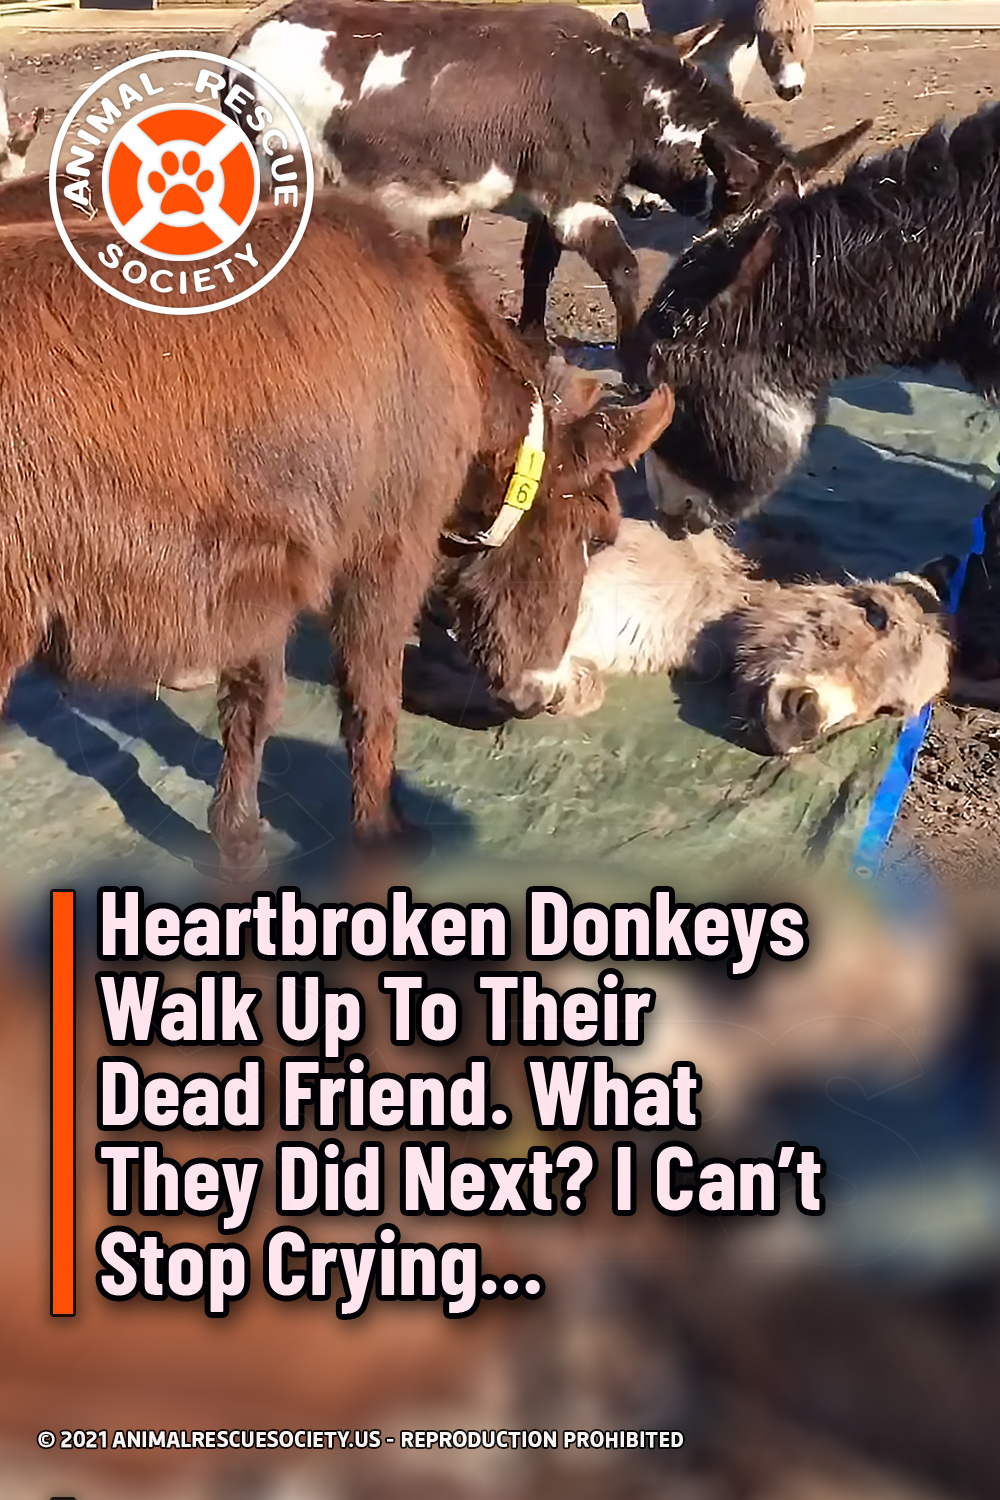 Heartbroken Donkeys Walk Up To Their Dead Friend. What They Did Next? I Can’t Stop Crying…